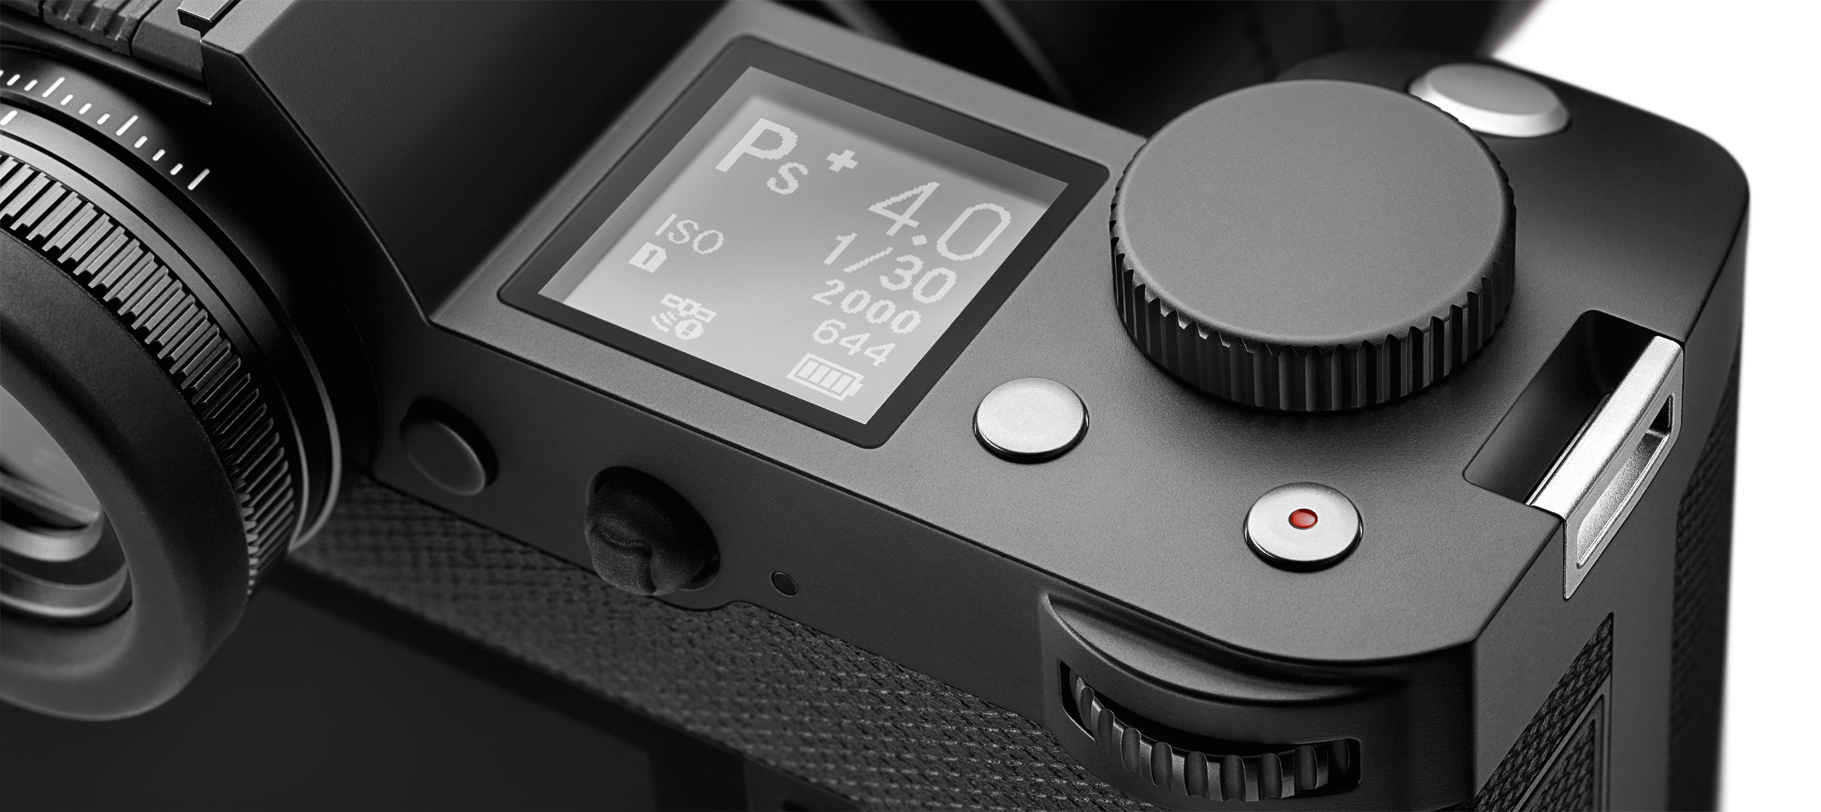 Leica SL (Typ 601) Review: A Professional Mirrorless Camera | Red 